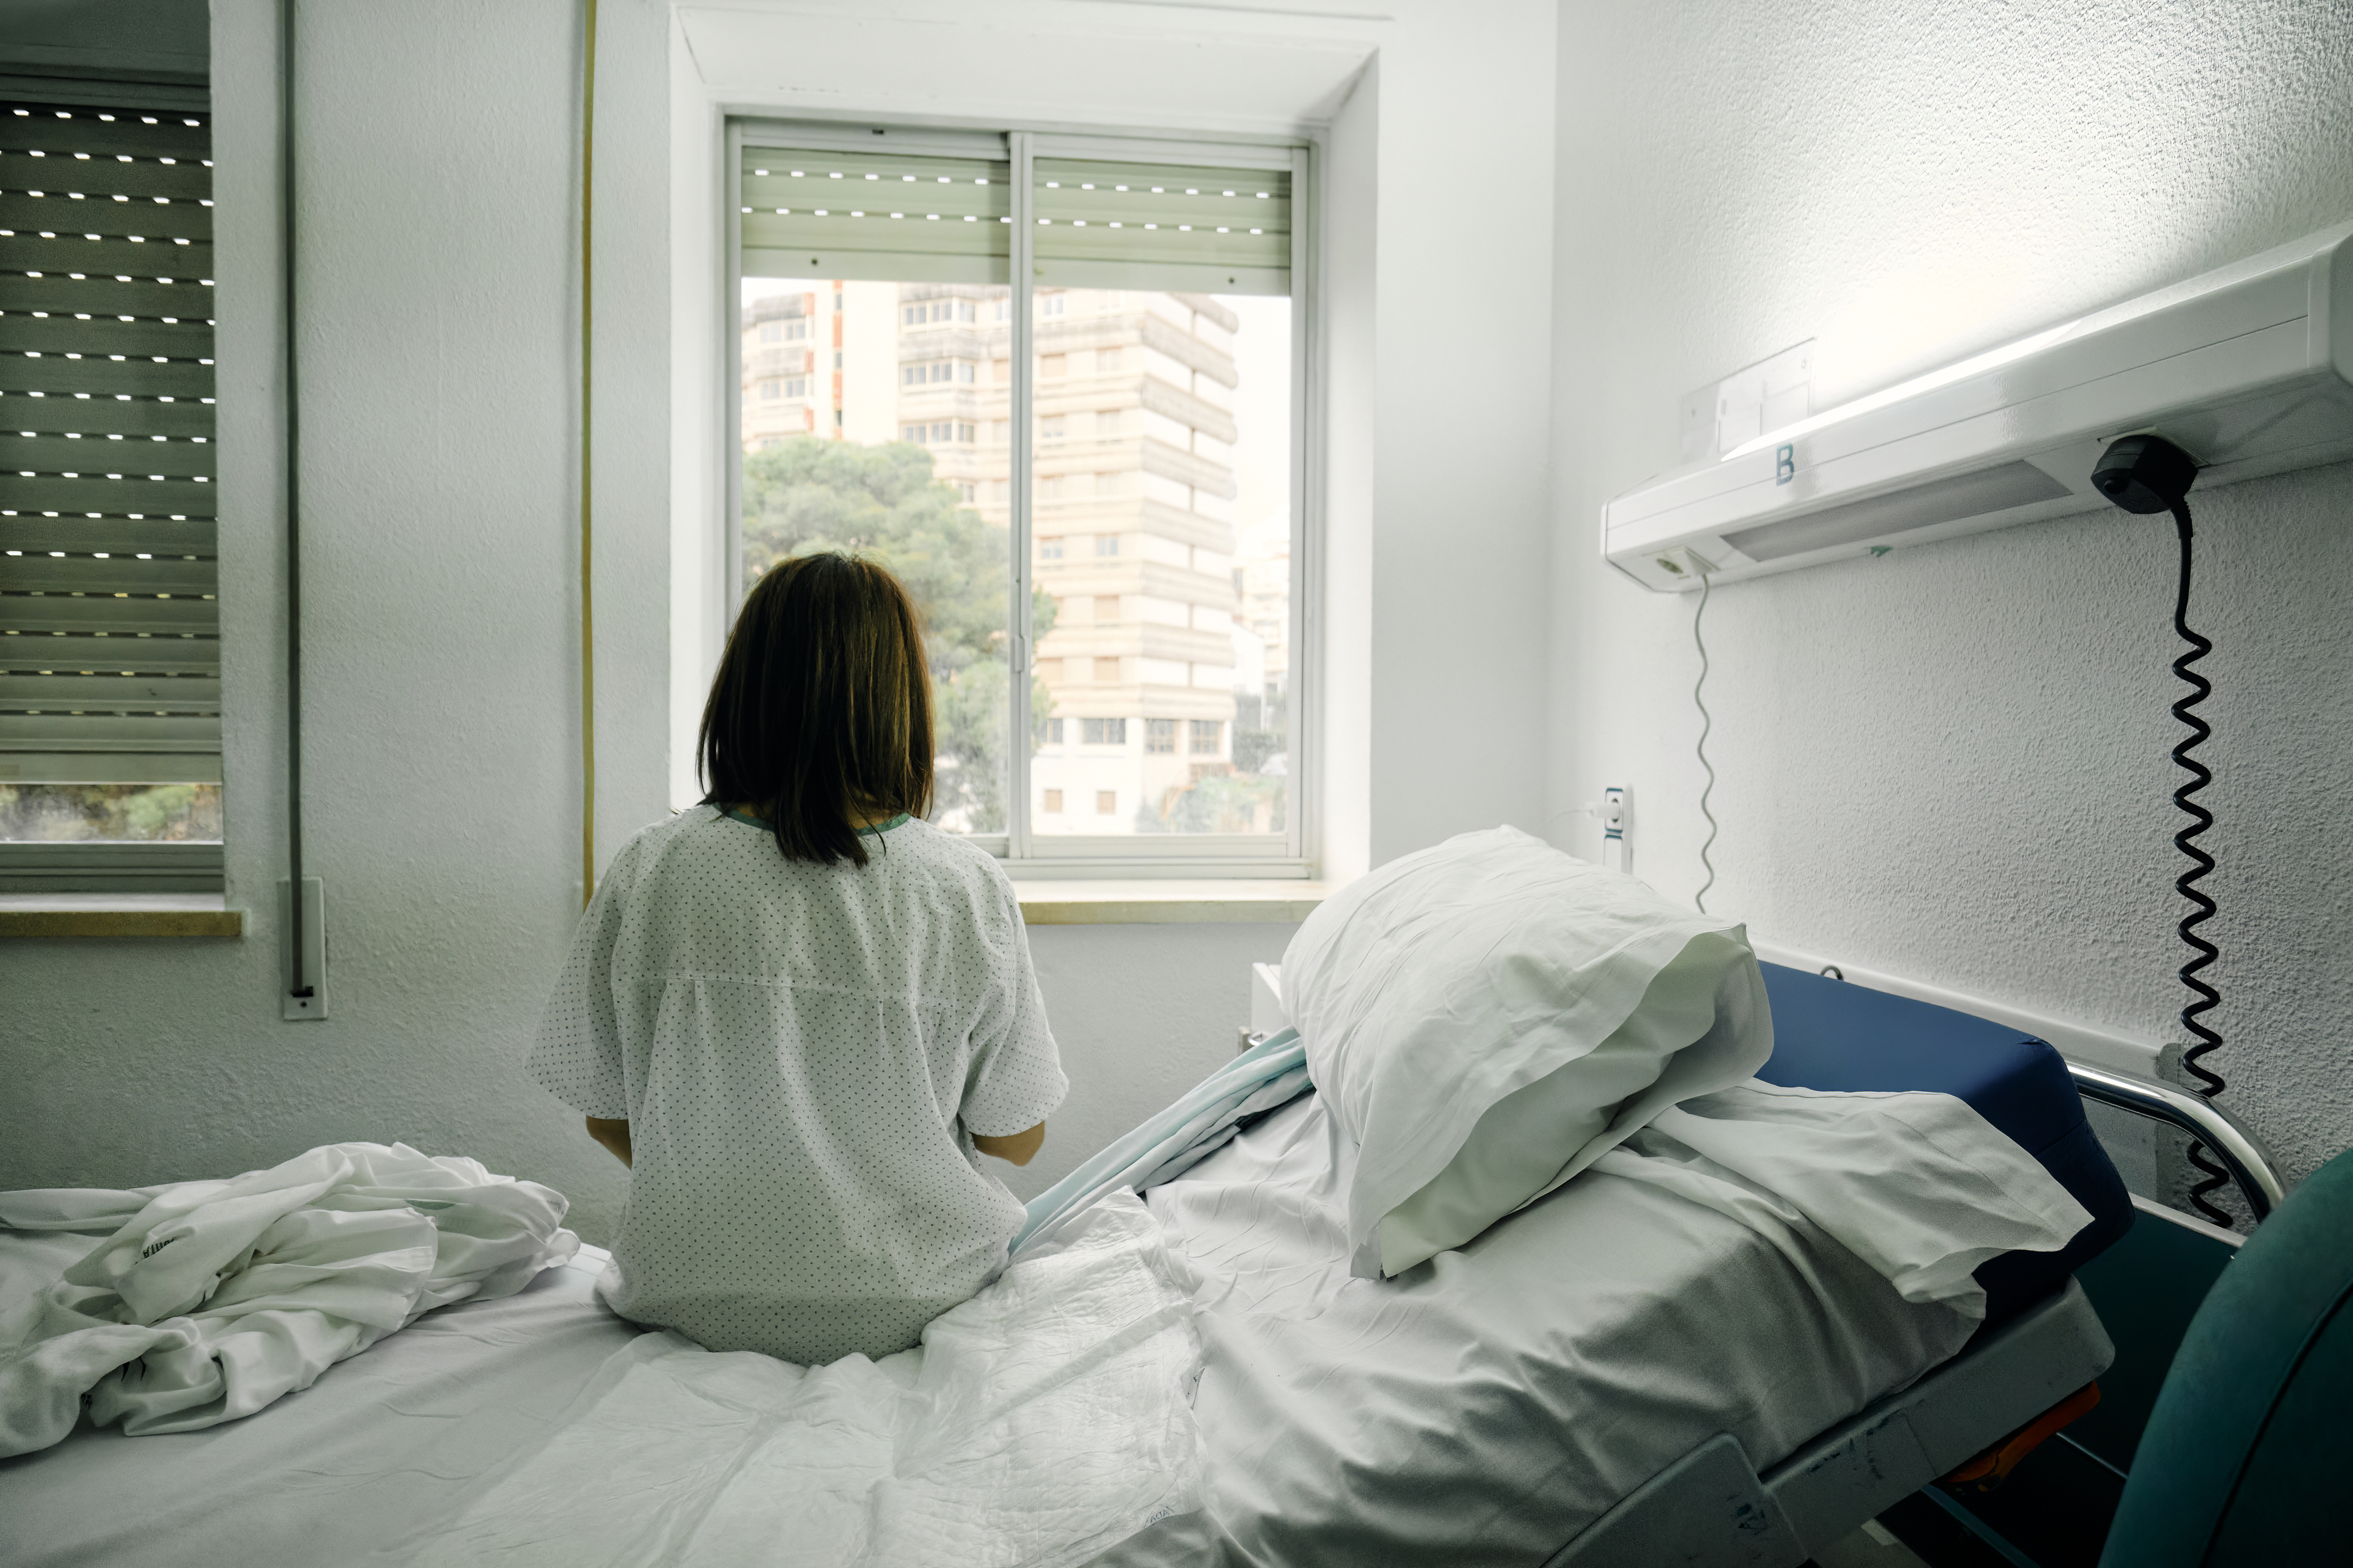 Person in a hospital gown sitting on a bed looking out of a window